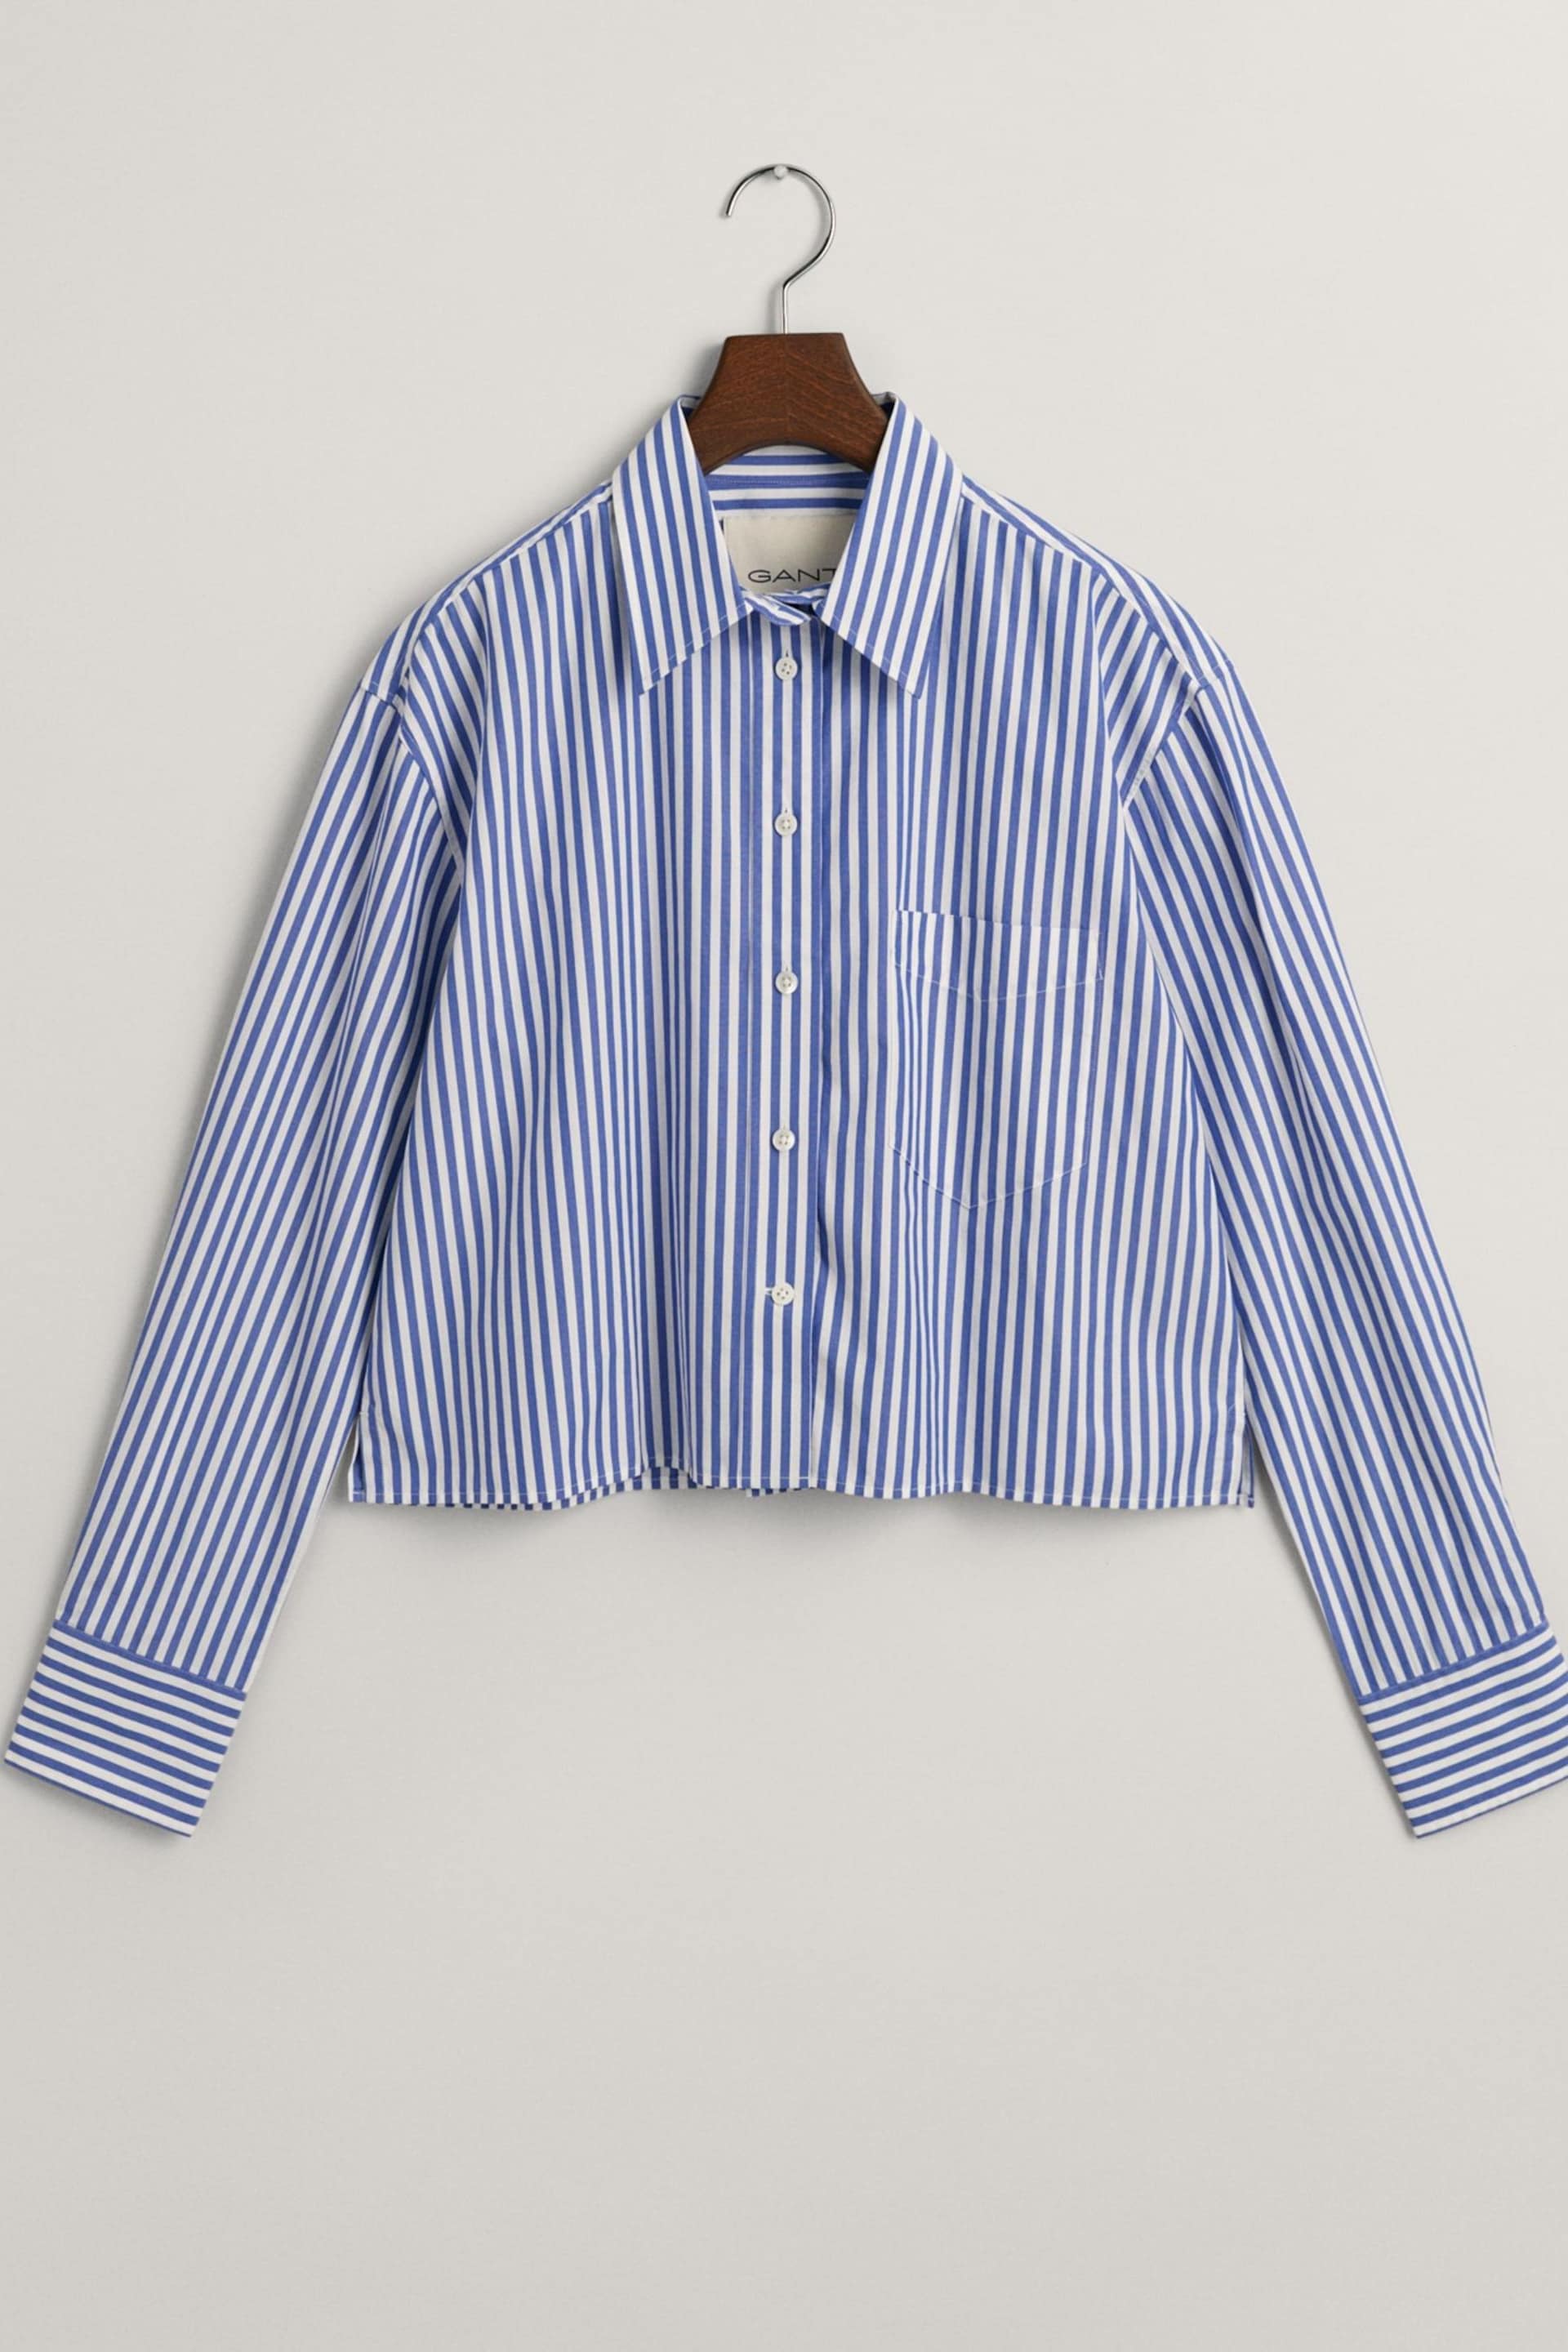 GANT Blue Relaxed Fit Cropped Striped Shirt - Image 8 of 8